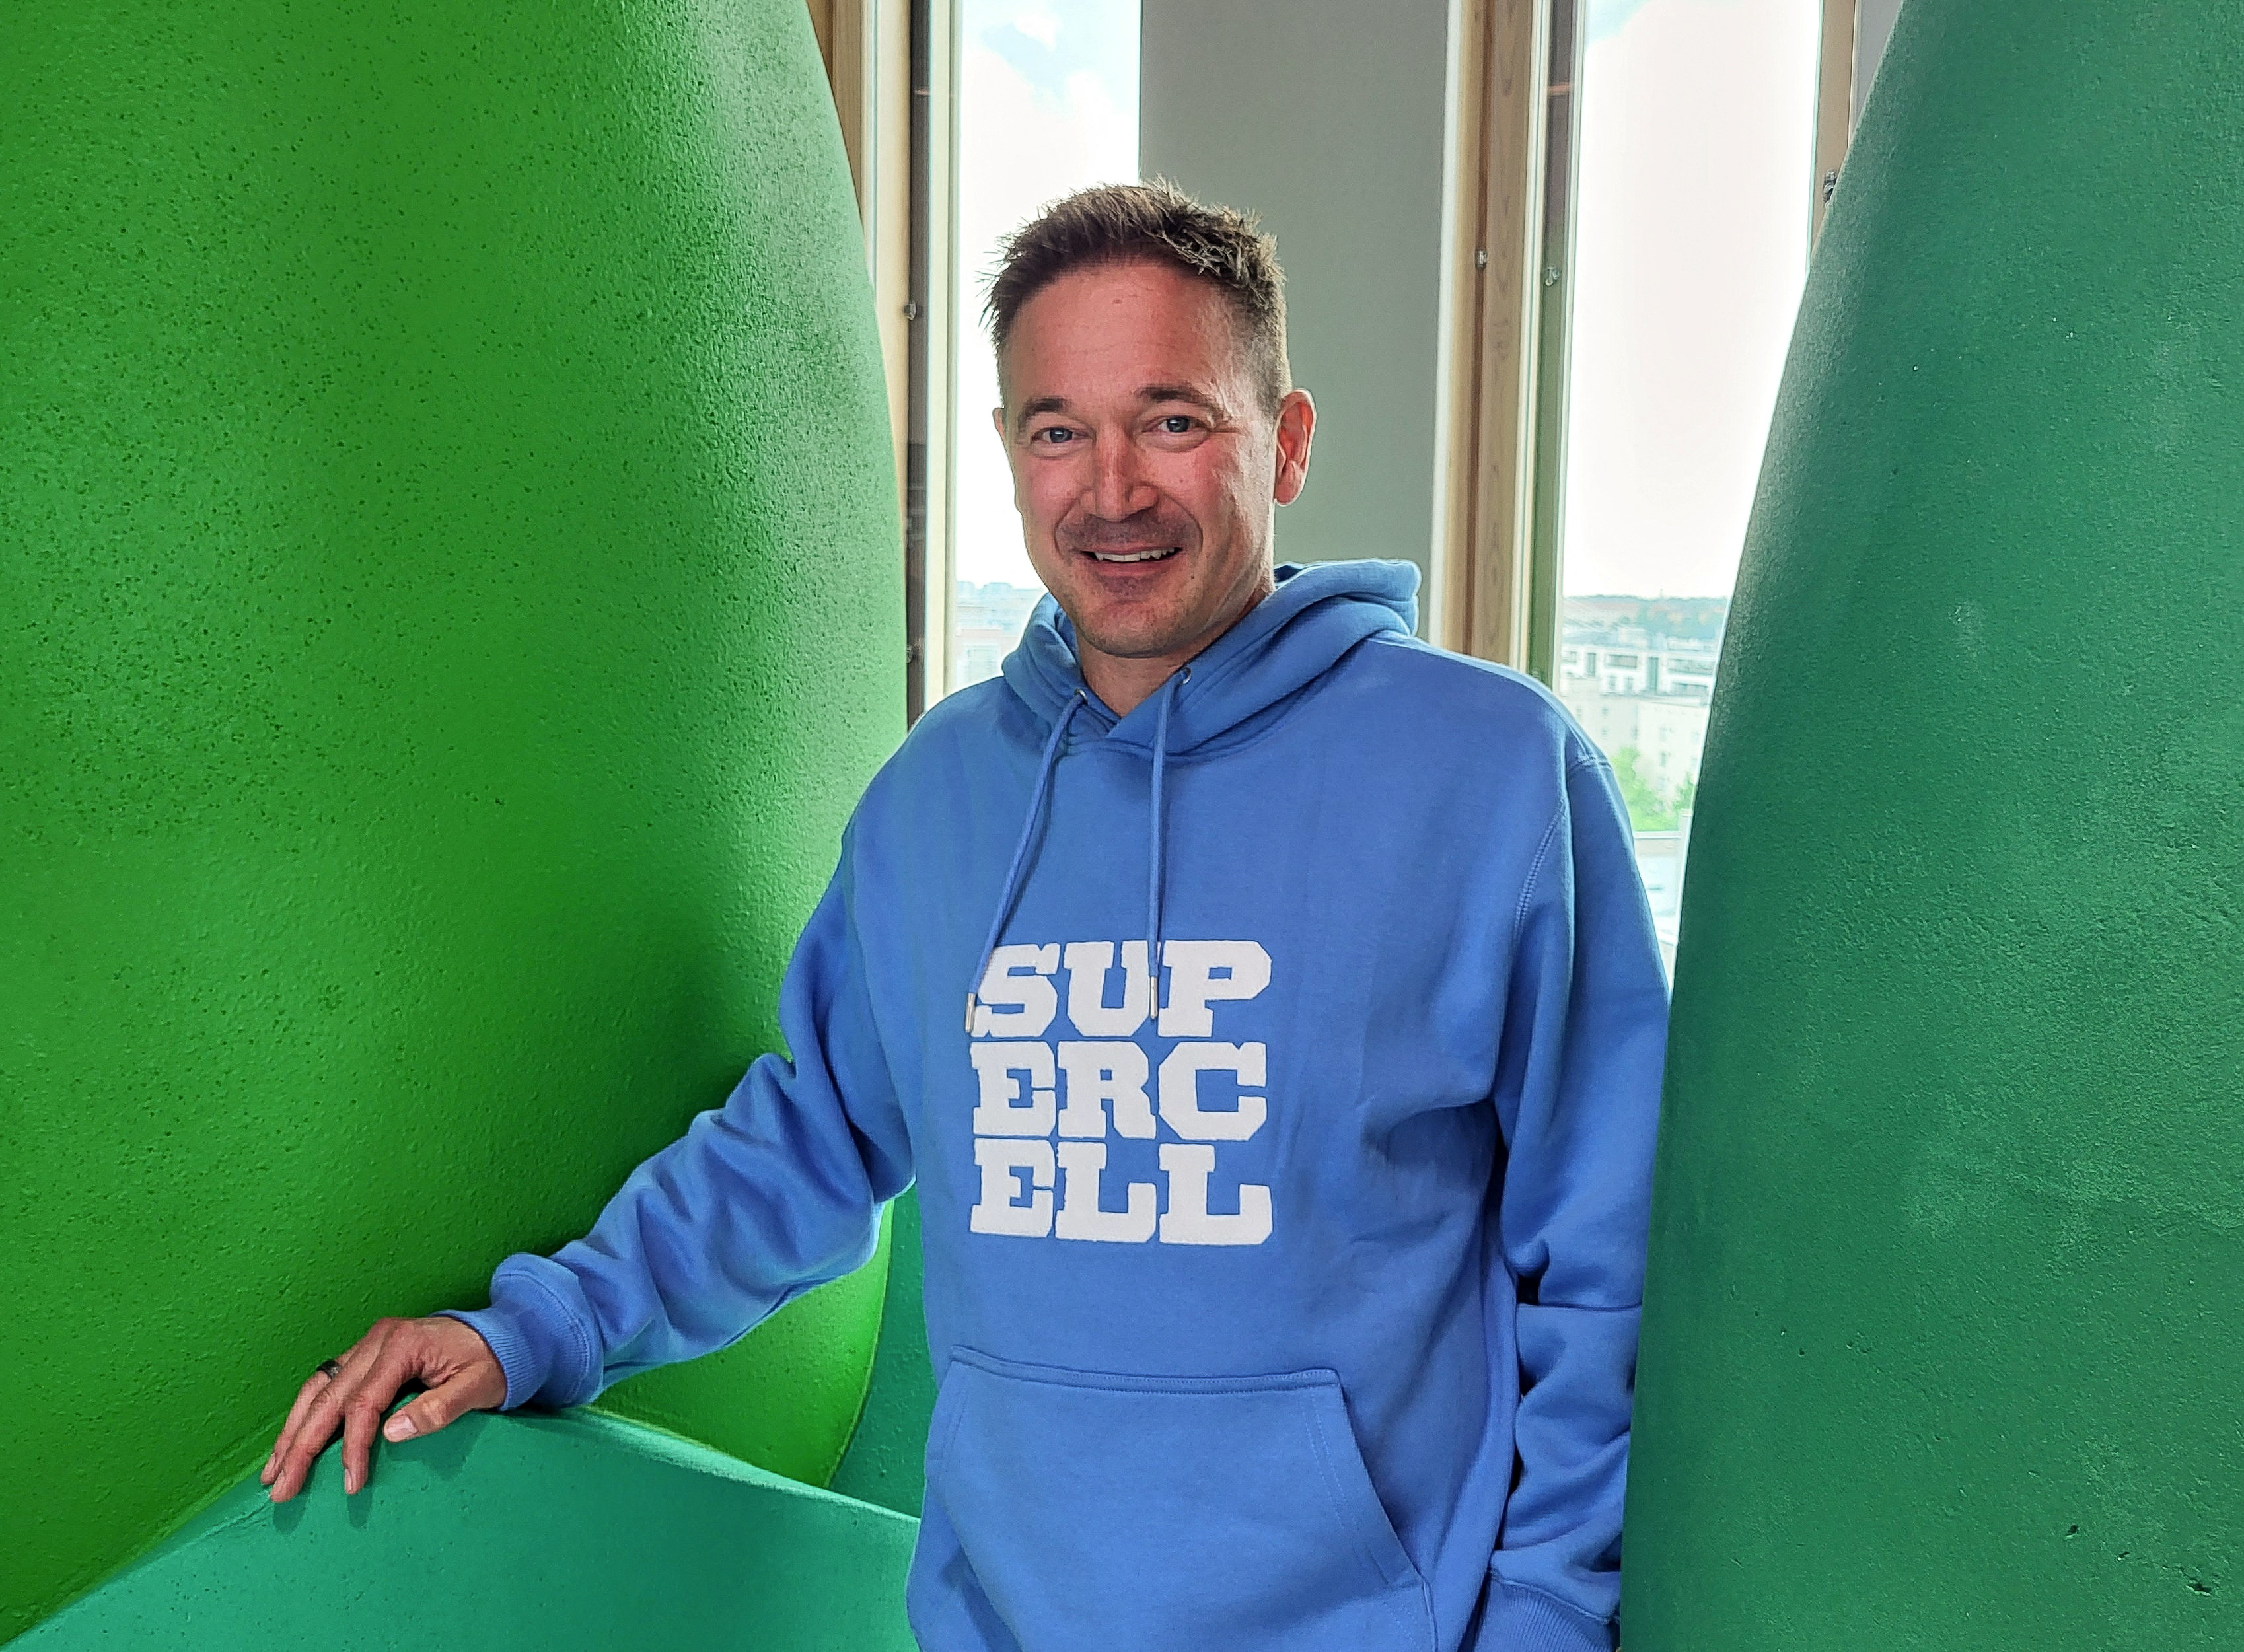 Supercell CEO Ilkka Paananen poses for pictures at Supercell headquarters in Helsinki